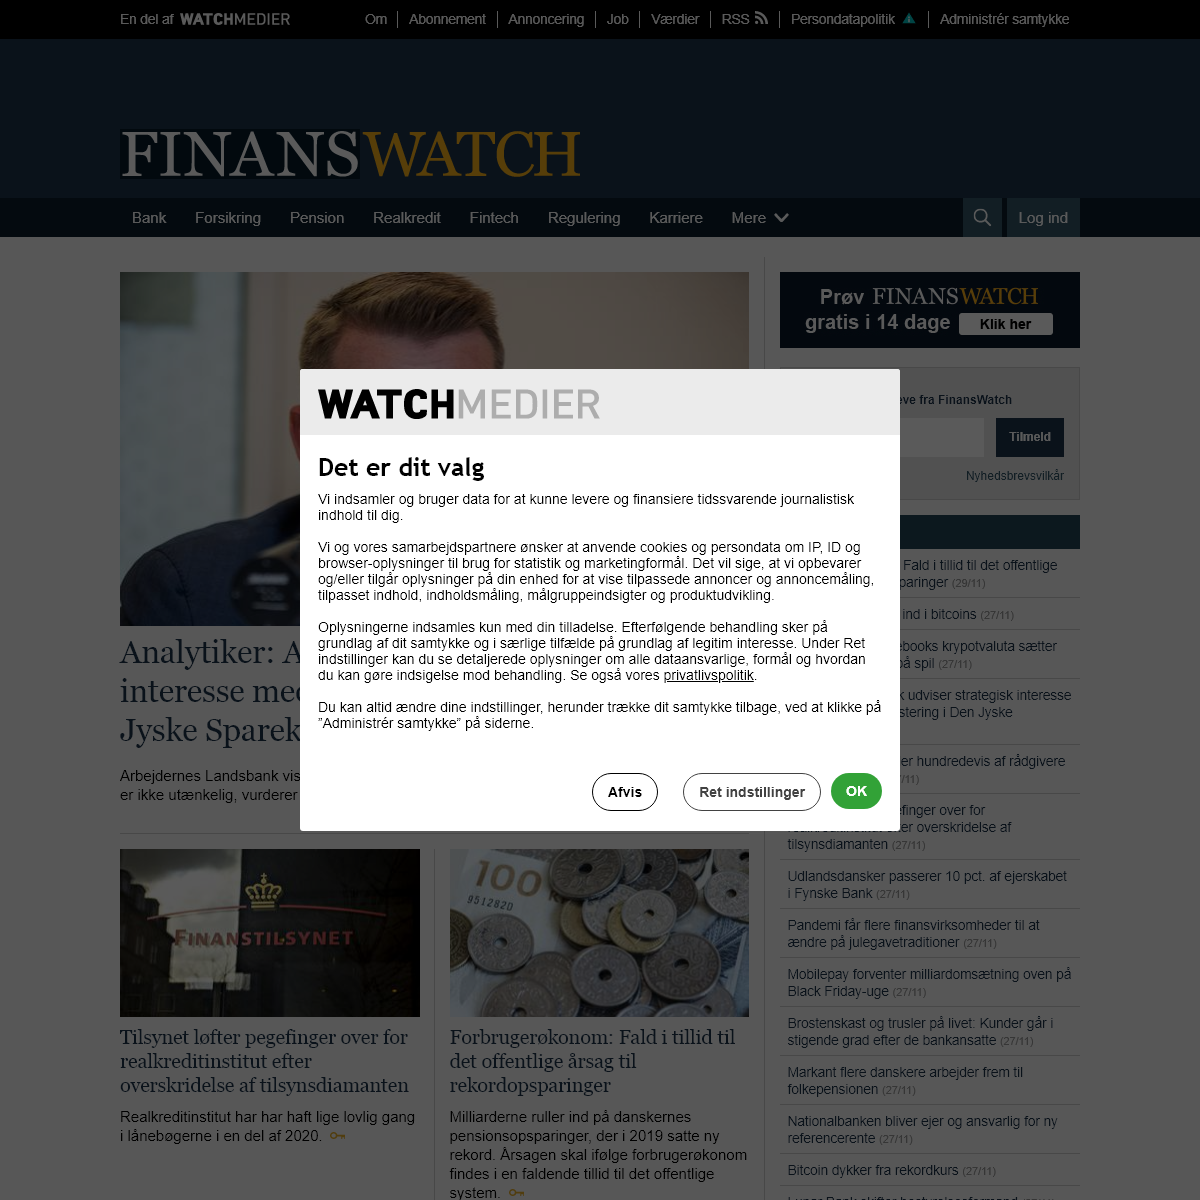 A complete backup of finanswatch.dk